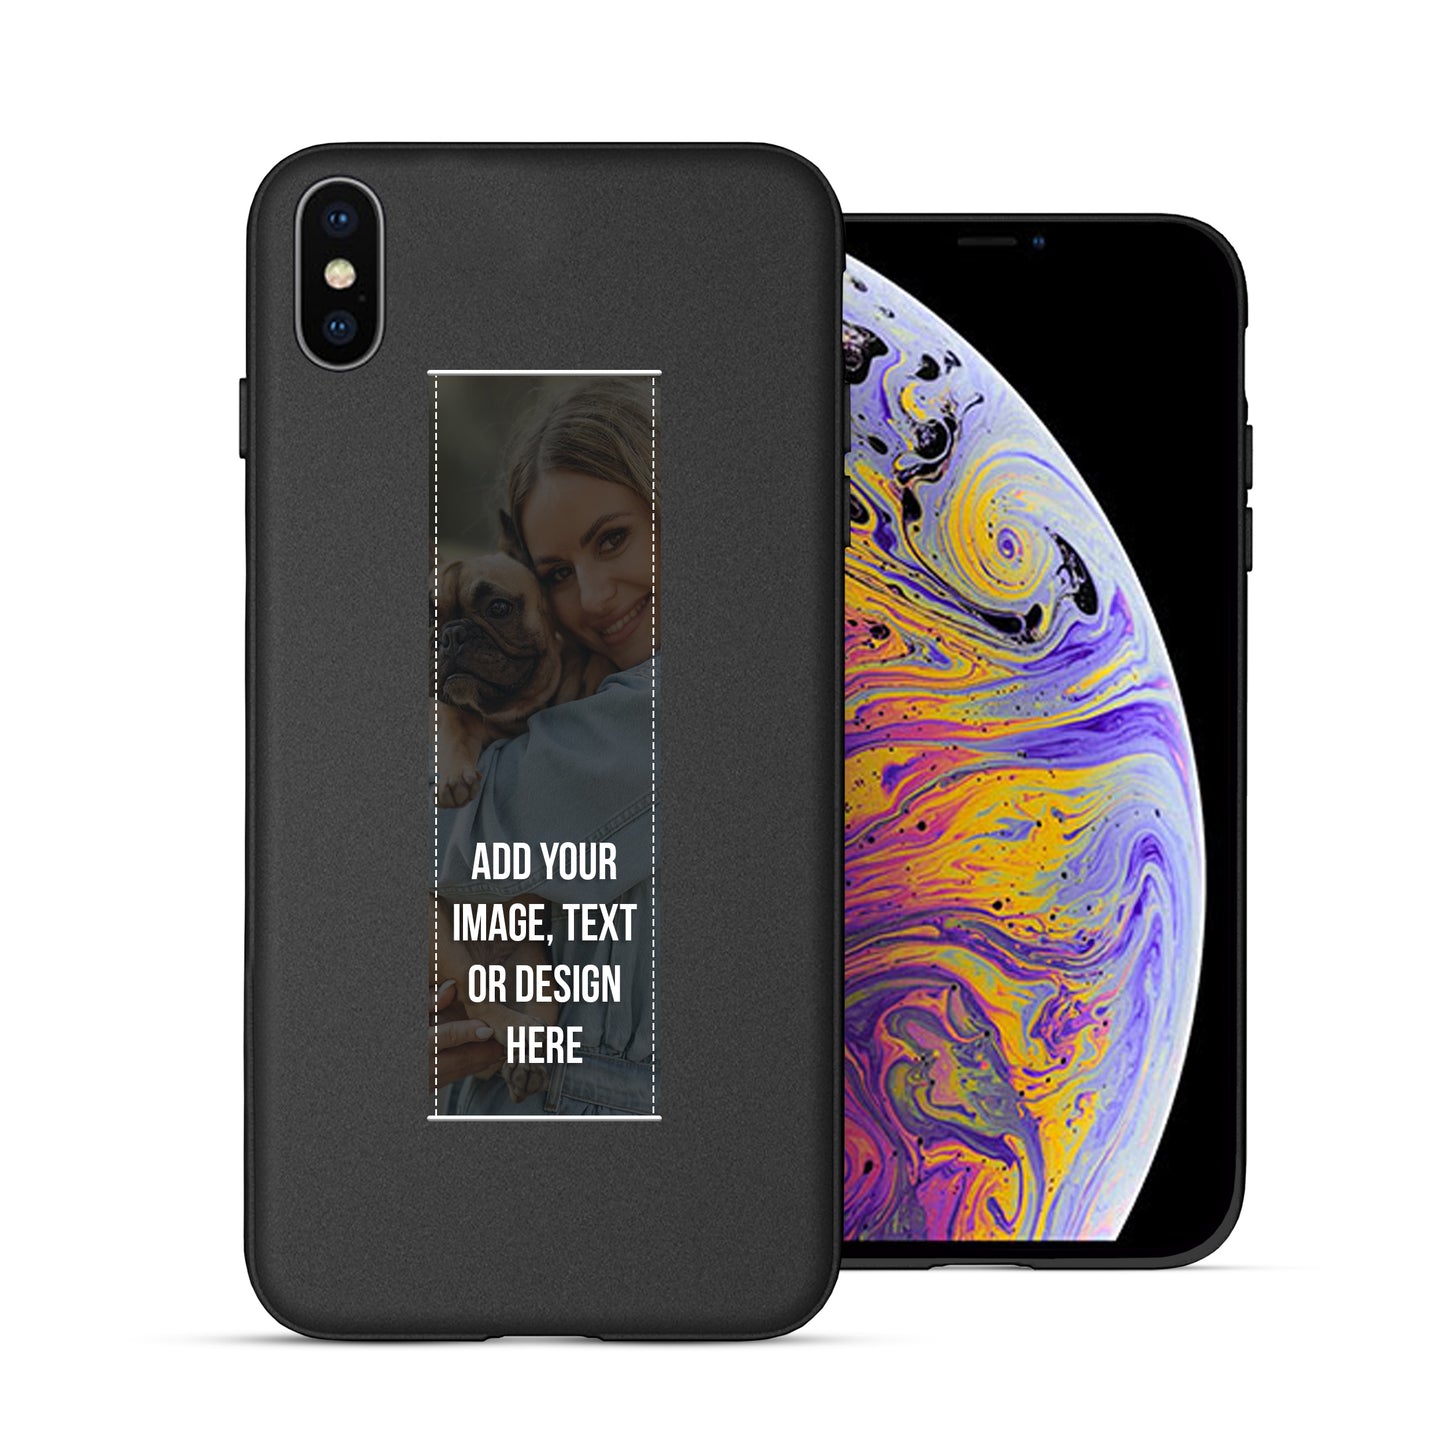 Finger Loop Phone Case For iPhone XS Max Black With Black & Grey Strap